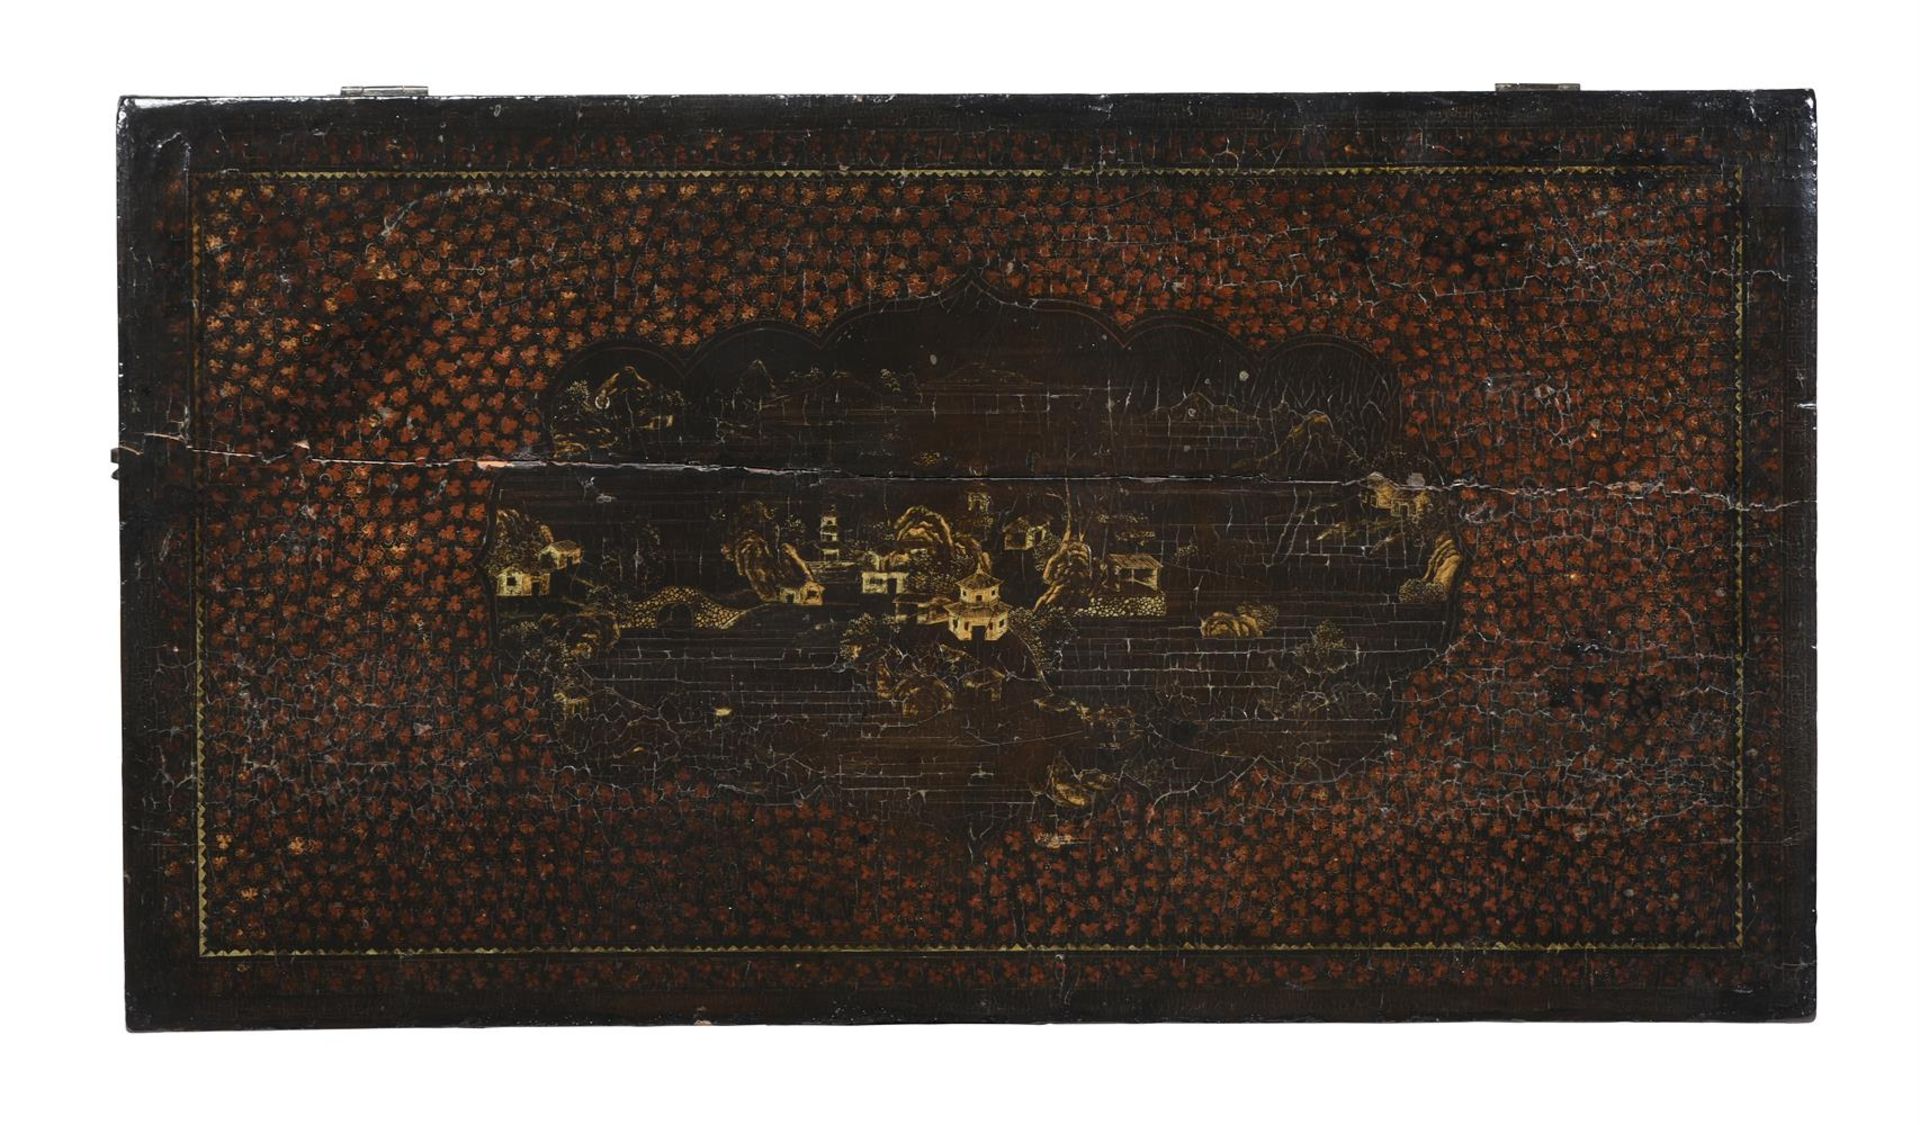 A CHINESE EXPORT BLACK LACQUER AND GILT DECORATED CHEST, LATE 18TH OR EARLY 19TH CENTURY - Image 2 of 4